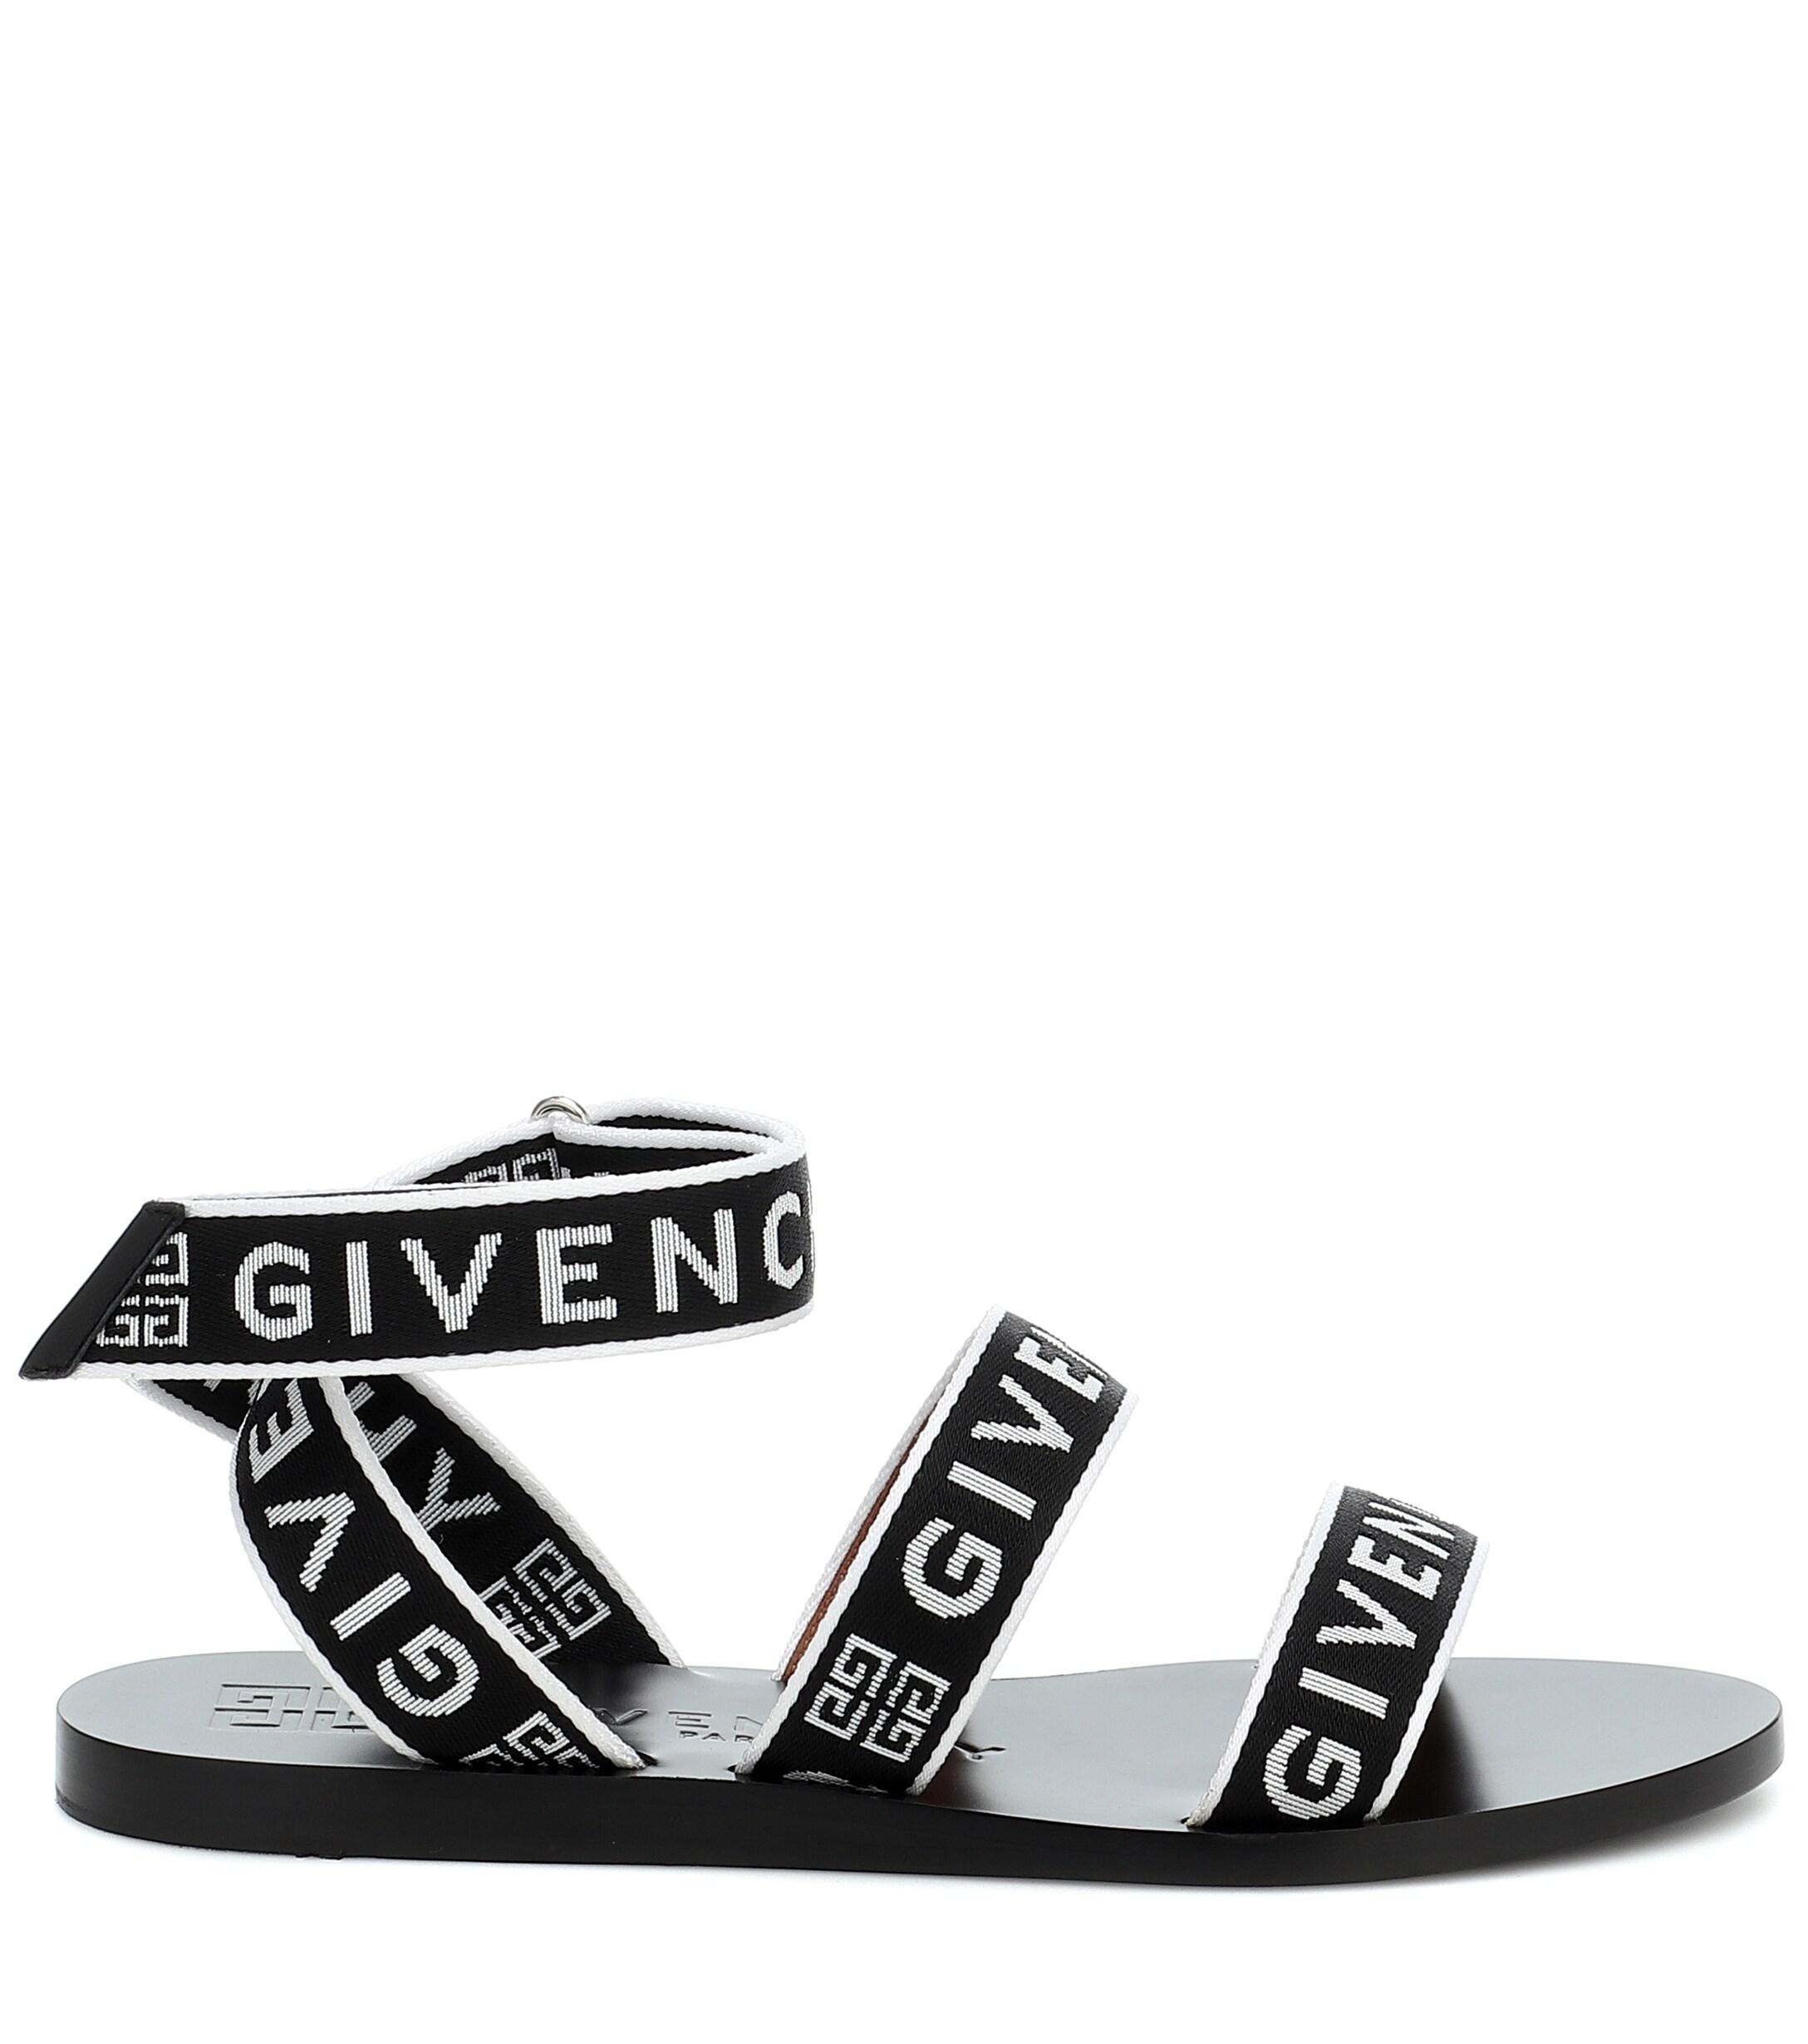 Givenchy 4g Logo Sandals in Black - Lyst